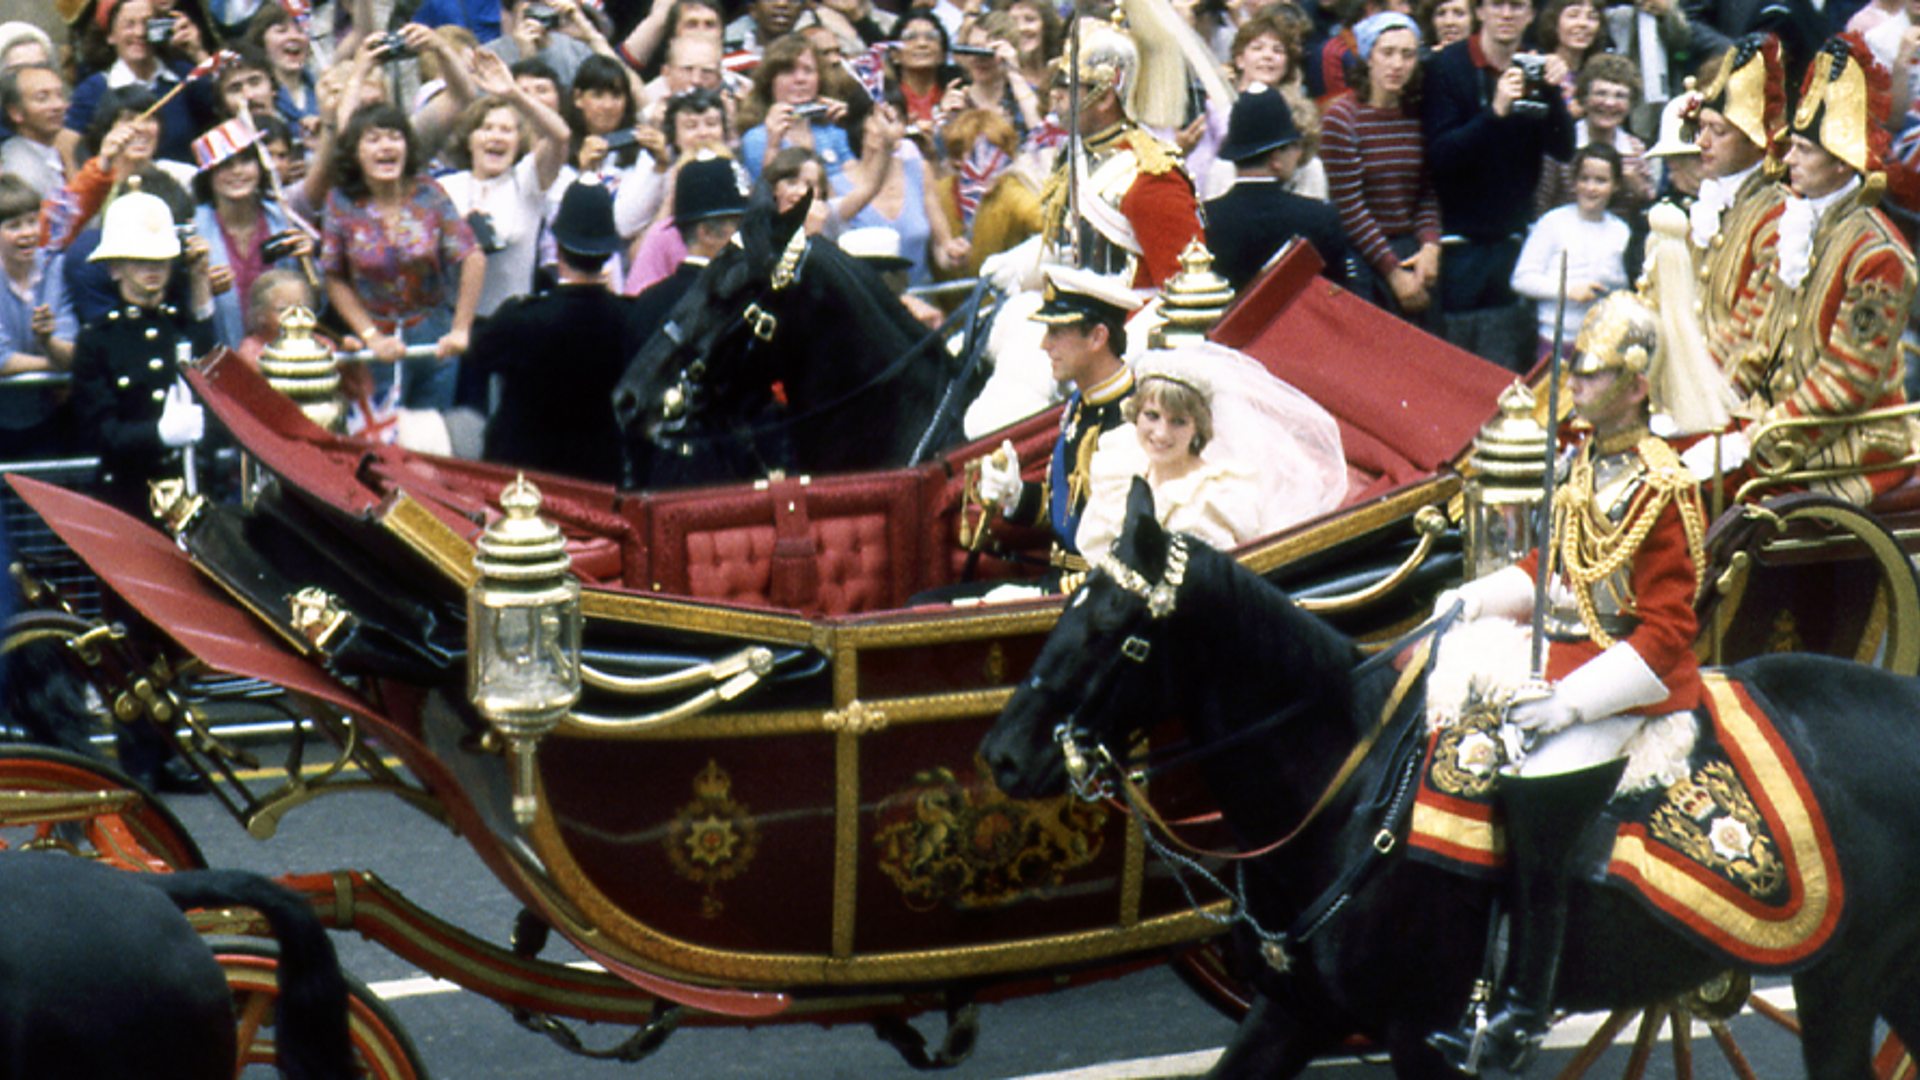 The Wedding Of Prince Charles And Lady Diana Spencer